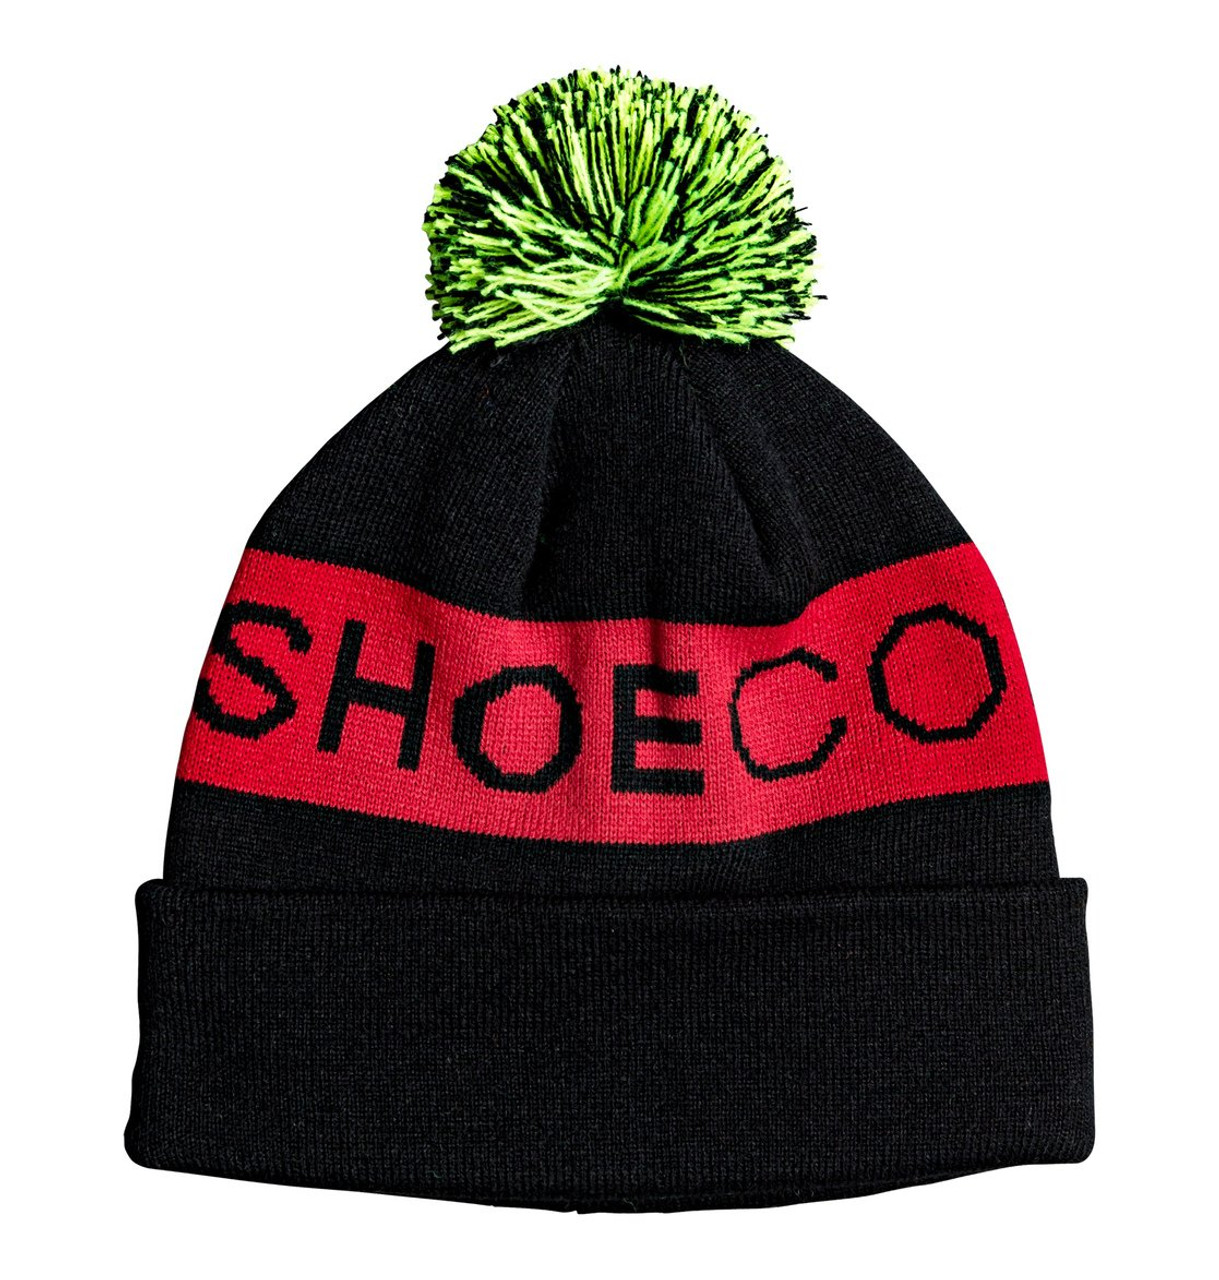 DC Chester Beanie Black Red OneSize